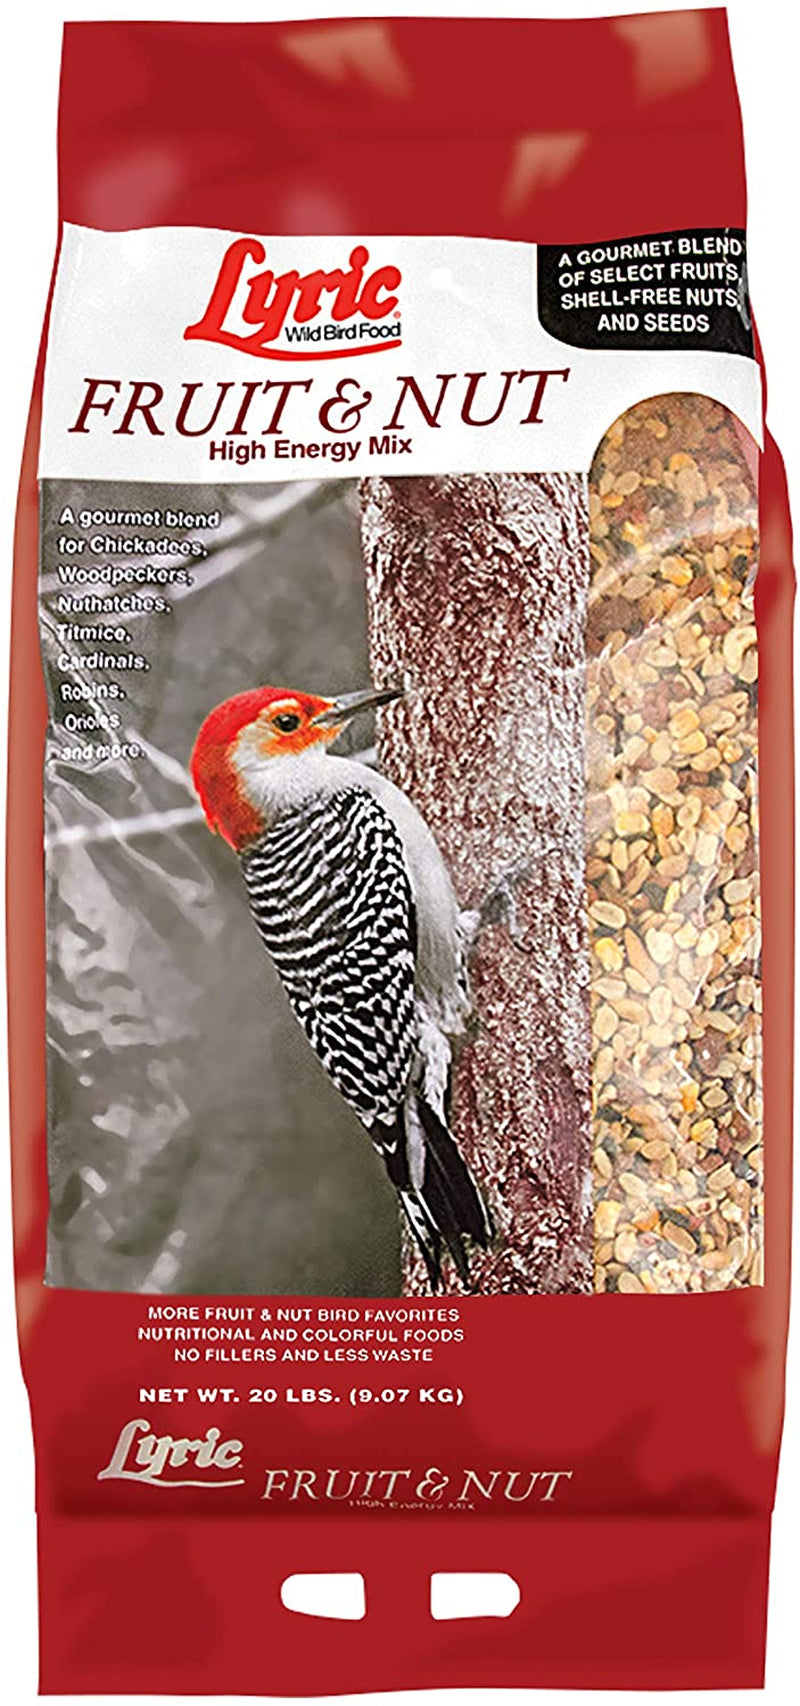 Fruit and Nut Wild Bird Seed, High Energy Wild Bird Food Mix, 20 Lb. Bag & Delite Wild Bird Seed, No Waste Bird Food Mix with Shell-Free Nuts and Seeds, 20 Lb. Bag